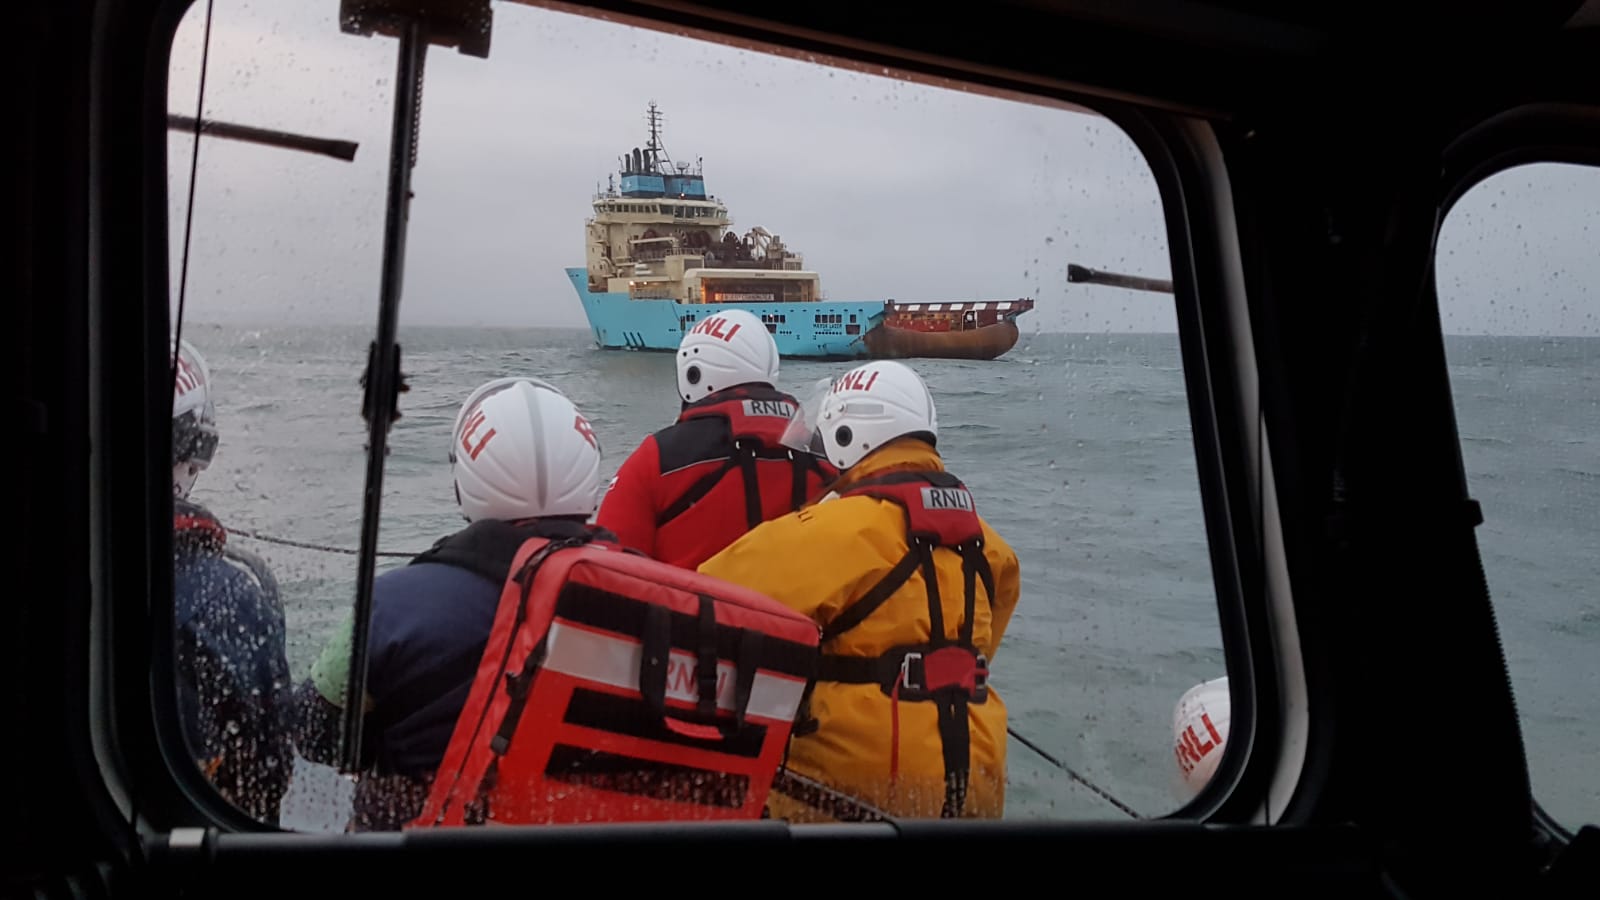 The lifeboat crew approaches the MV Maersk Laser.